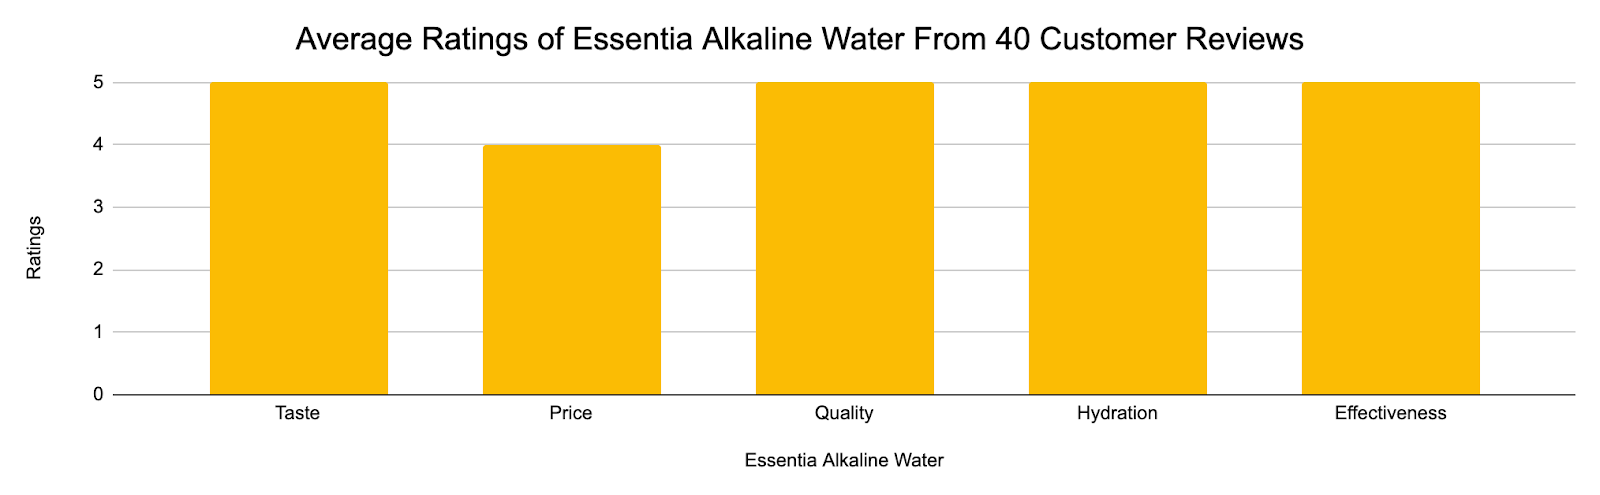 The image shows that Essentia Alkaline water has an average rating of 4.7 stars out of 5, based on 40 customer reviews.